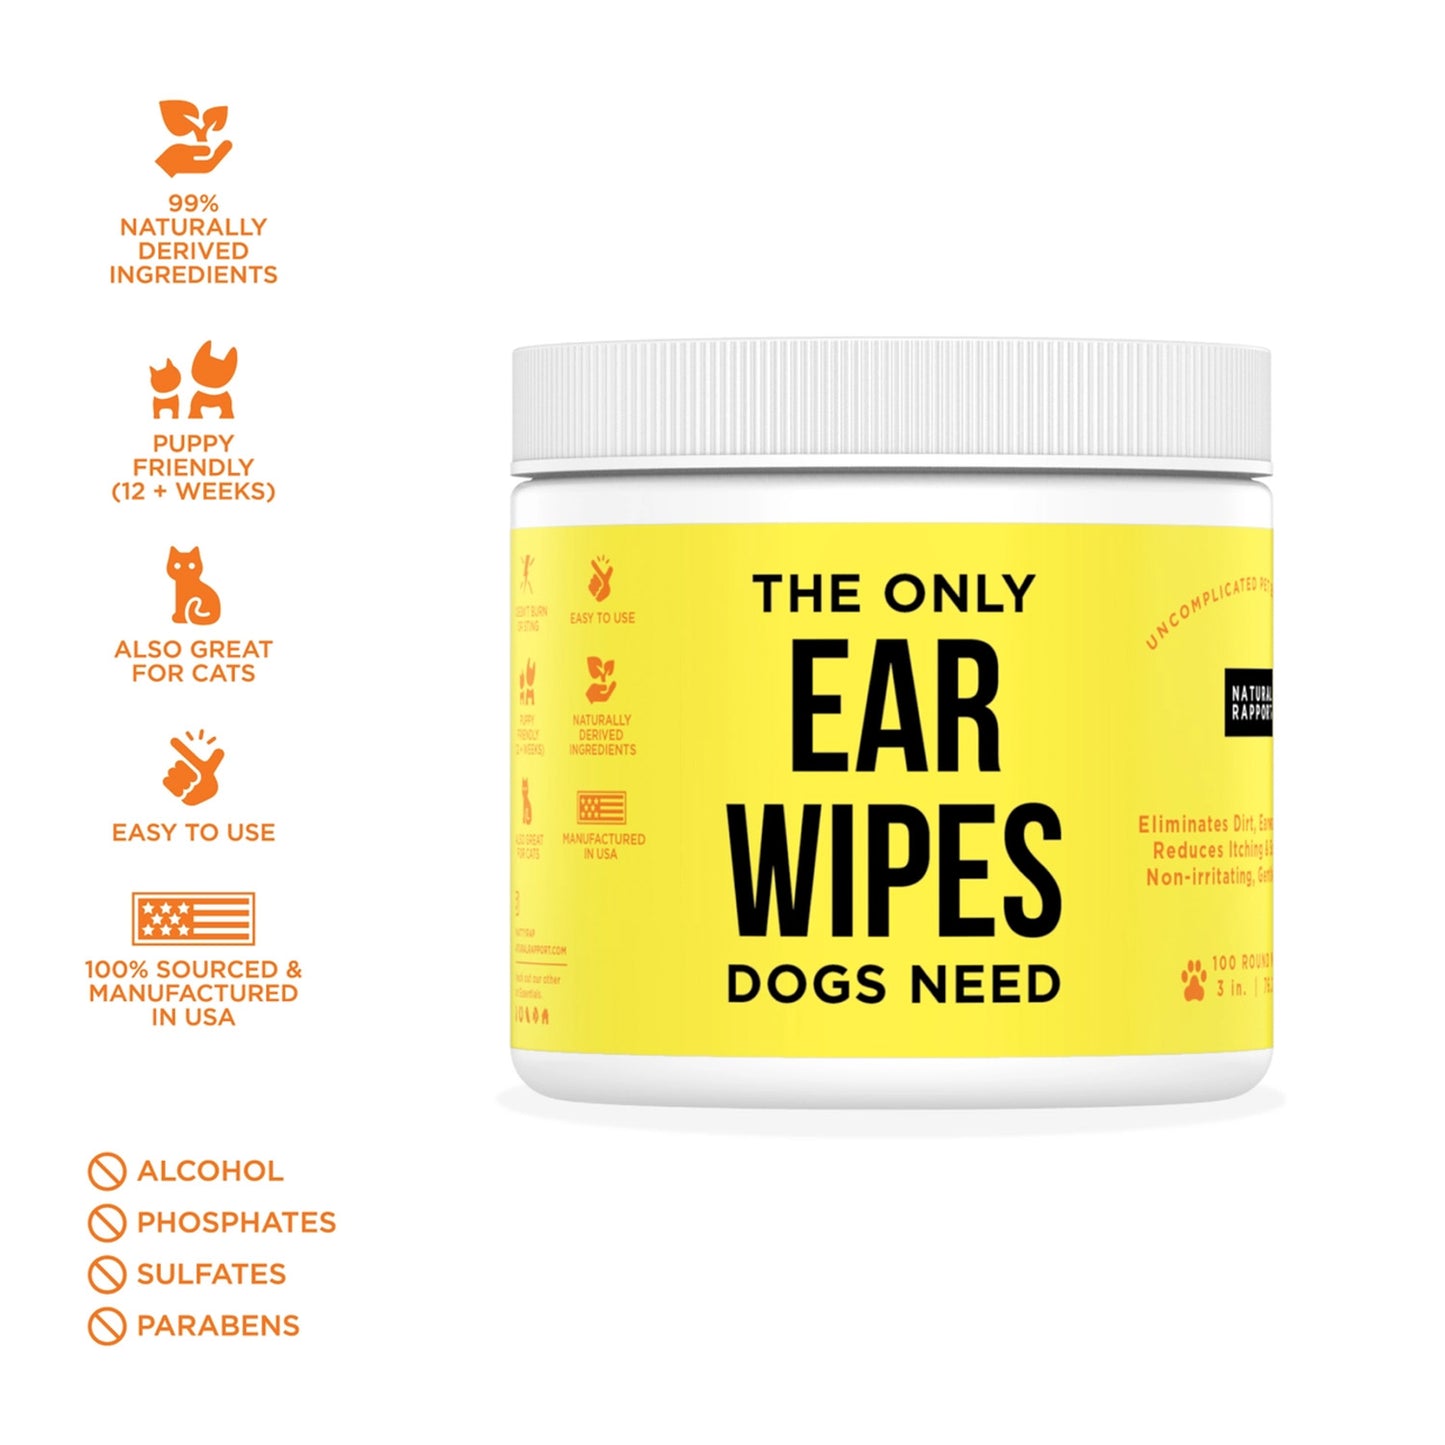 The Only Ear Wipes Dogs Need